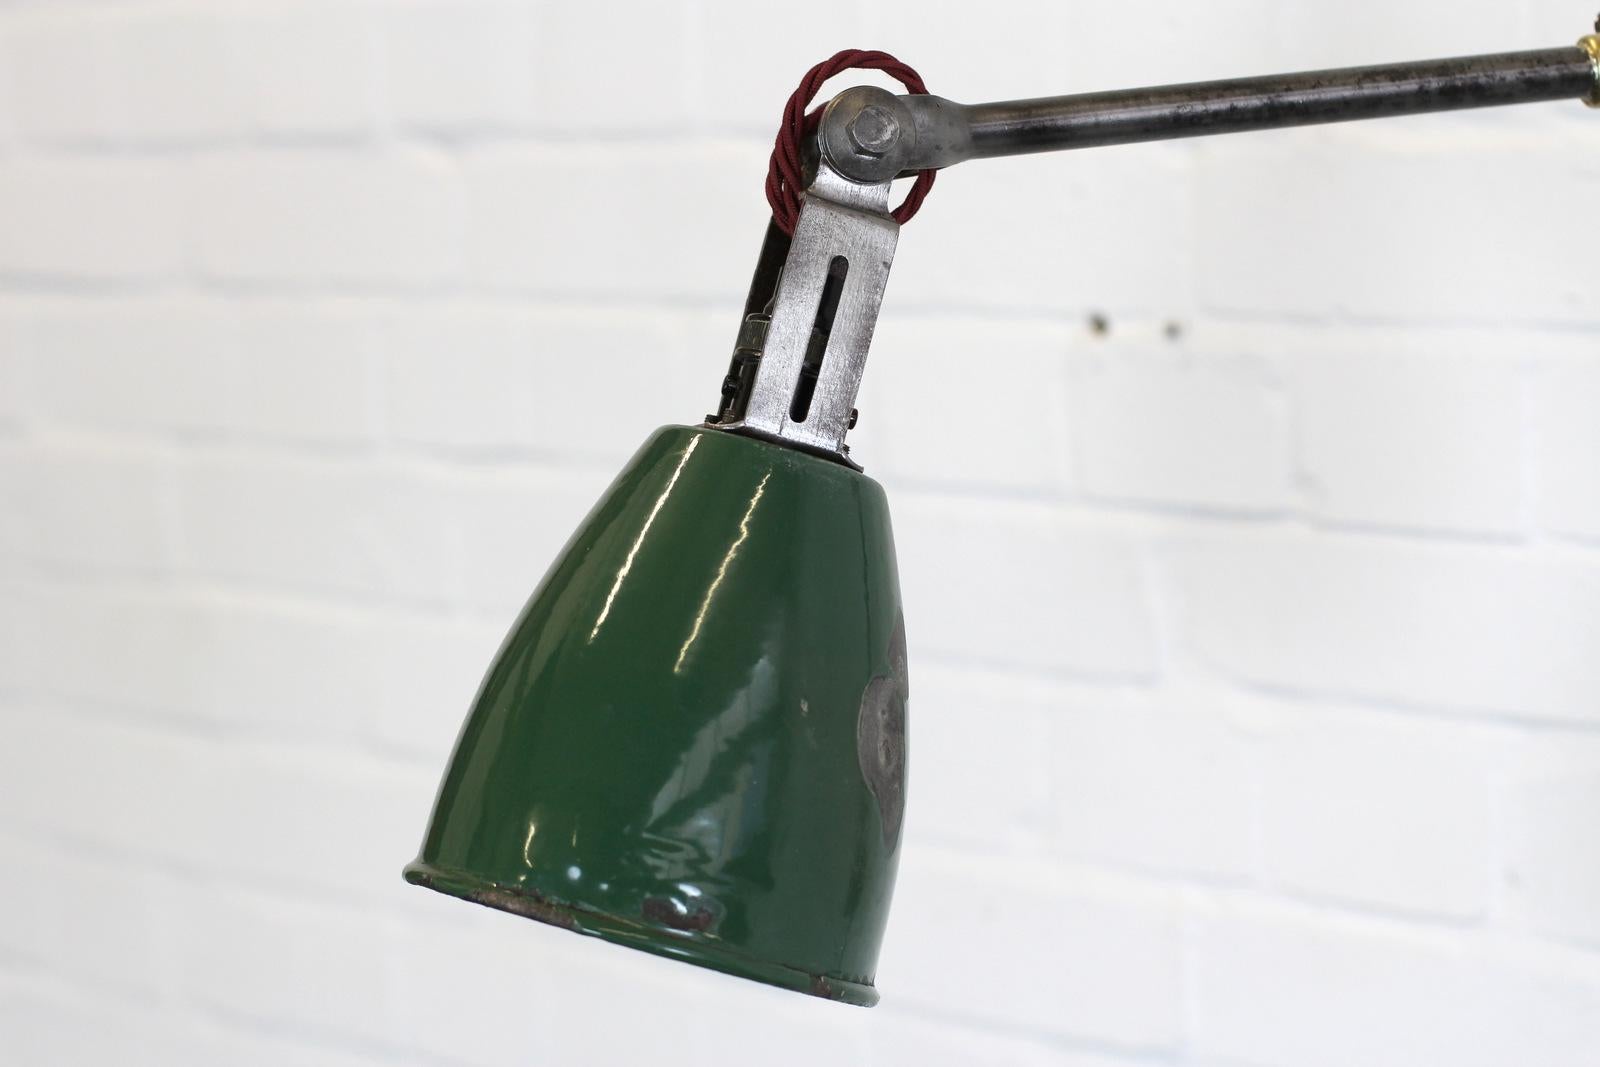 Wall mounted Industrial task lamp by Dugdills, circa 1940s.

- Articulated steel arms
- Vitreous green enamel shade
- Relief makers mark on the base
- Takes B22 fitting bulbs
- Original bakelite switch
- English, 1940s.
- Extends up to 80cm